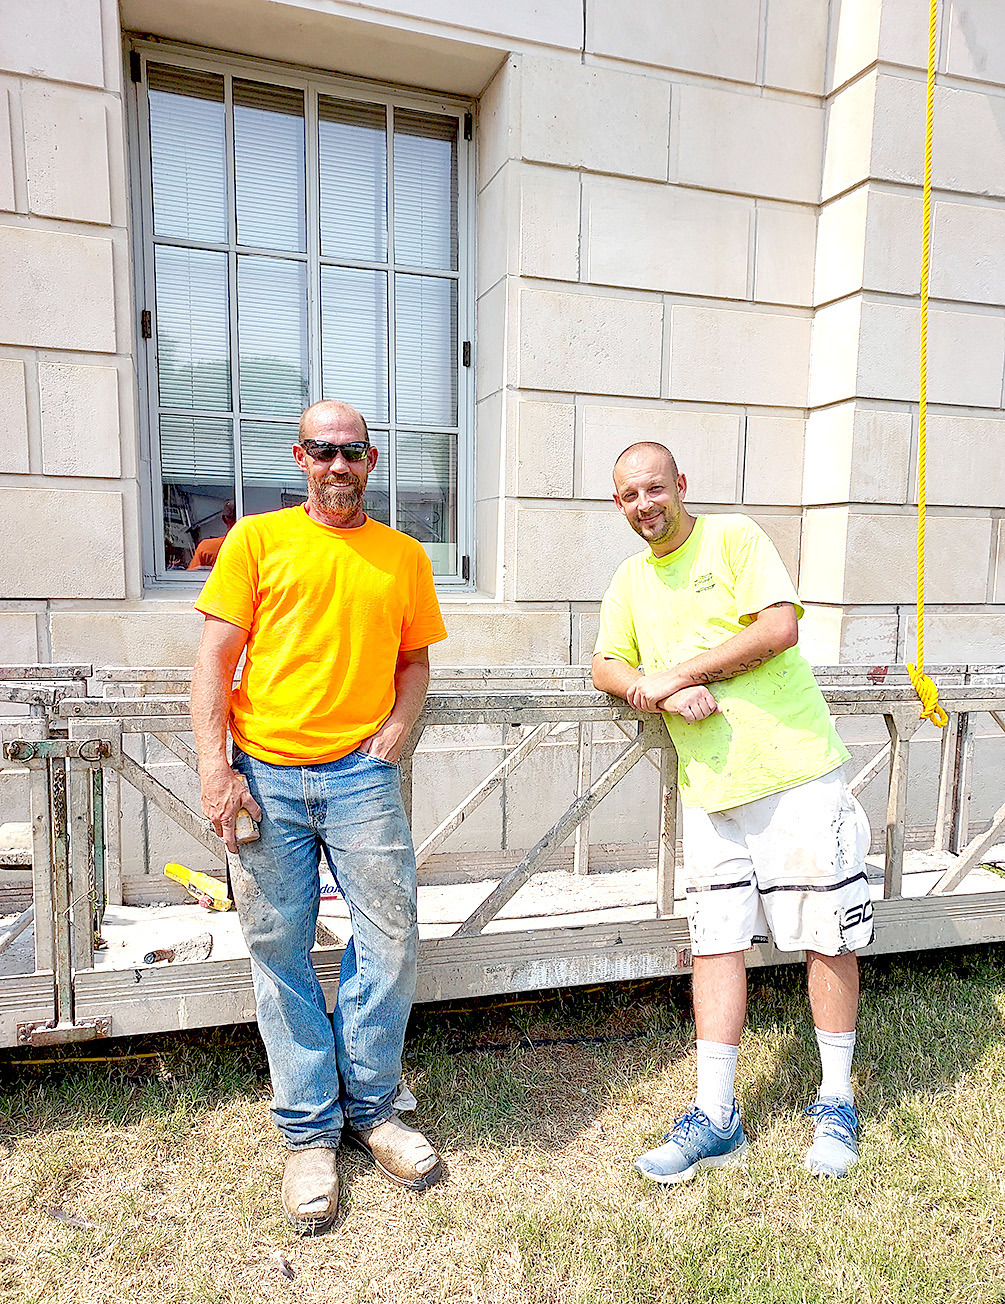 JAKOB STOCKTON, owner of Stockton Restoration, and Jason DePalmo are working on the exterior of the Rooks County Courthouse. They are doing work, which includes power washing, tuck pointing and other miscellaneous repairs to the stone and mortar.